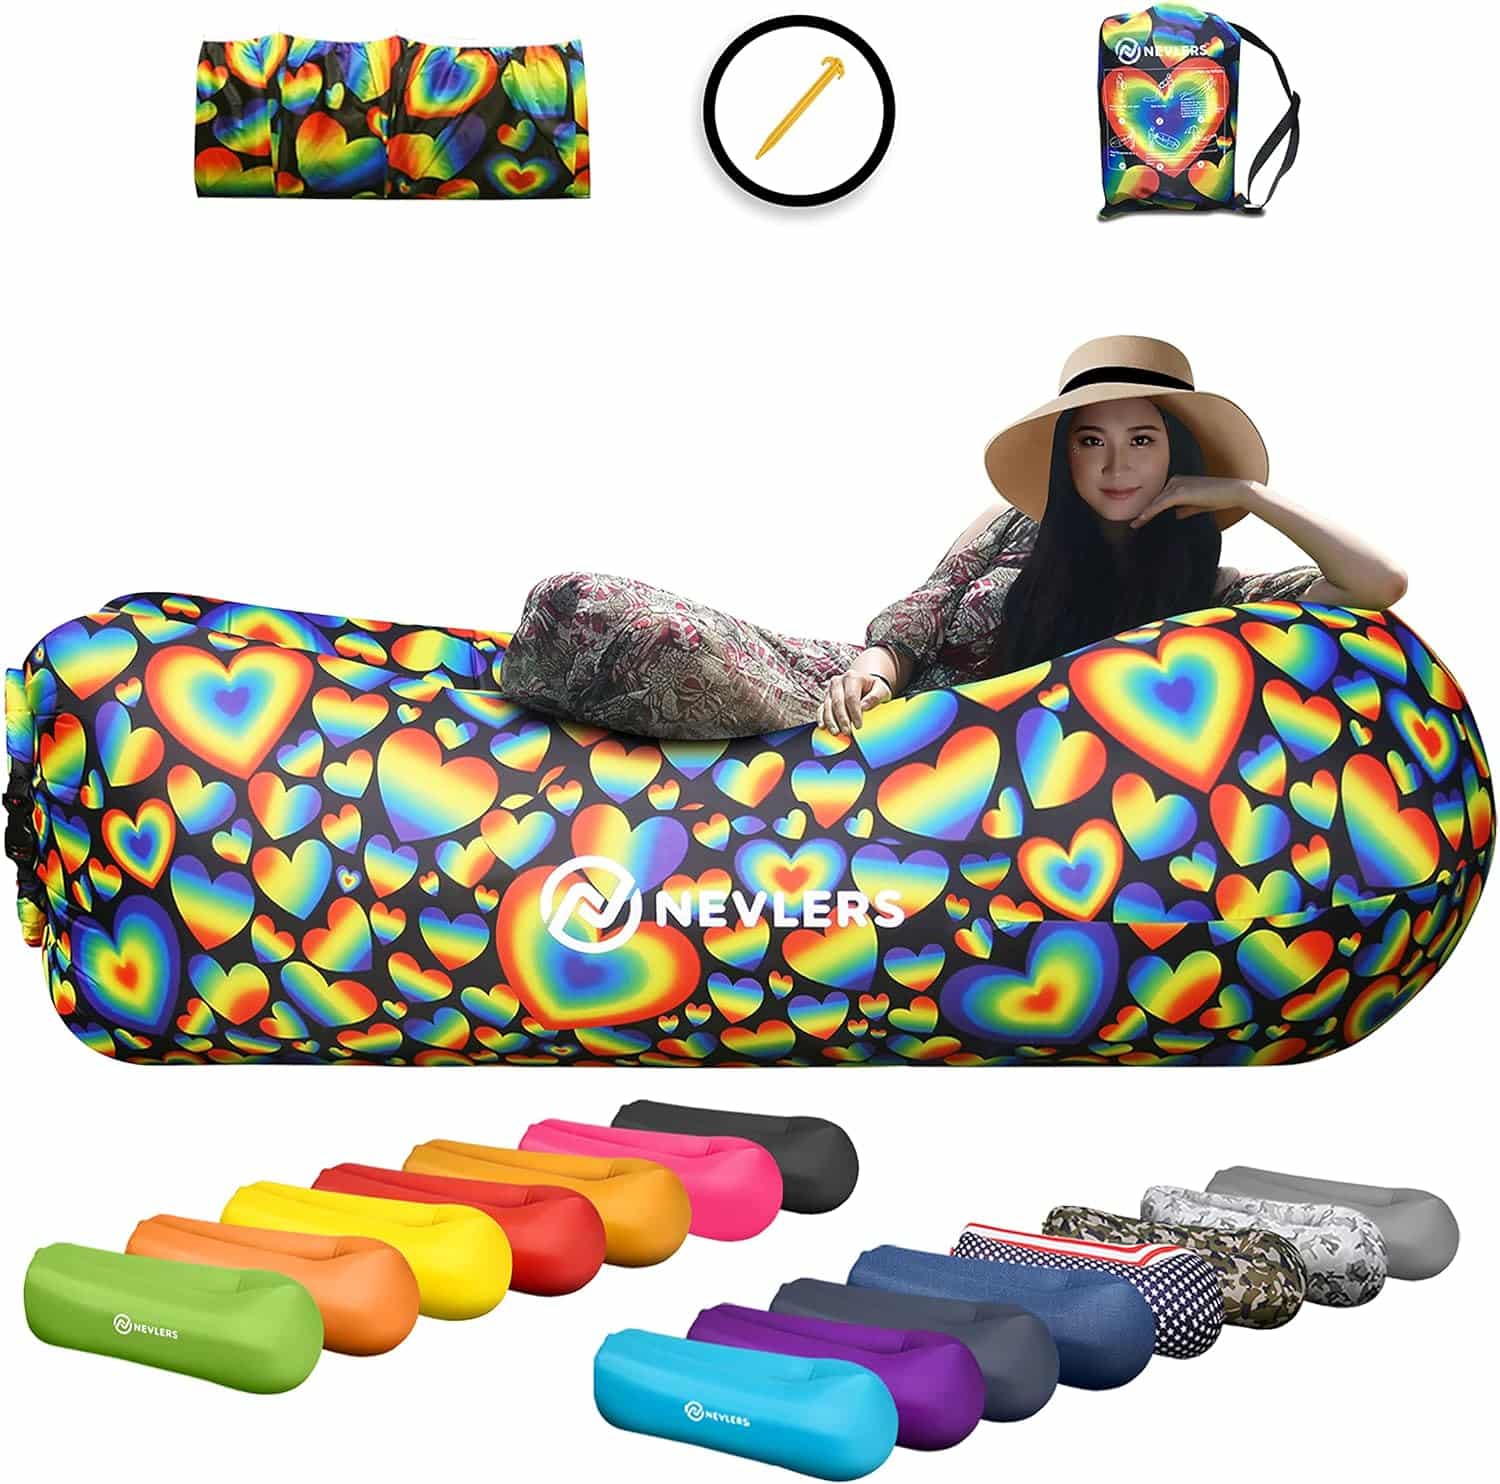 Nevlers Air Couch Inflatable Lounger